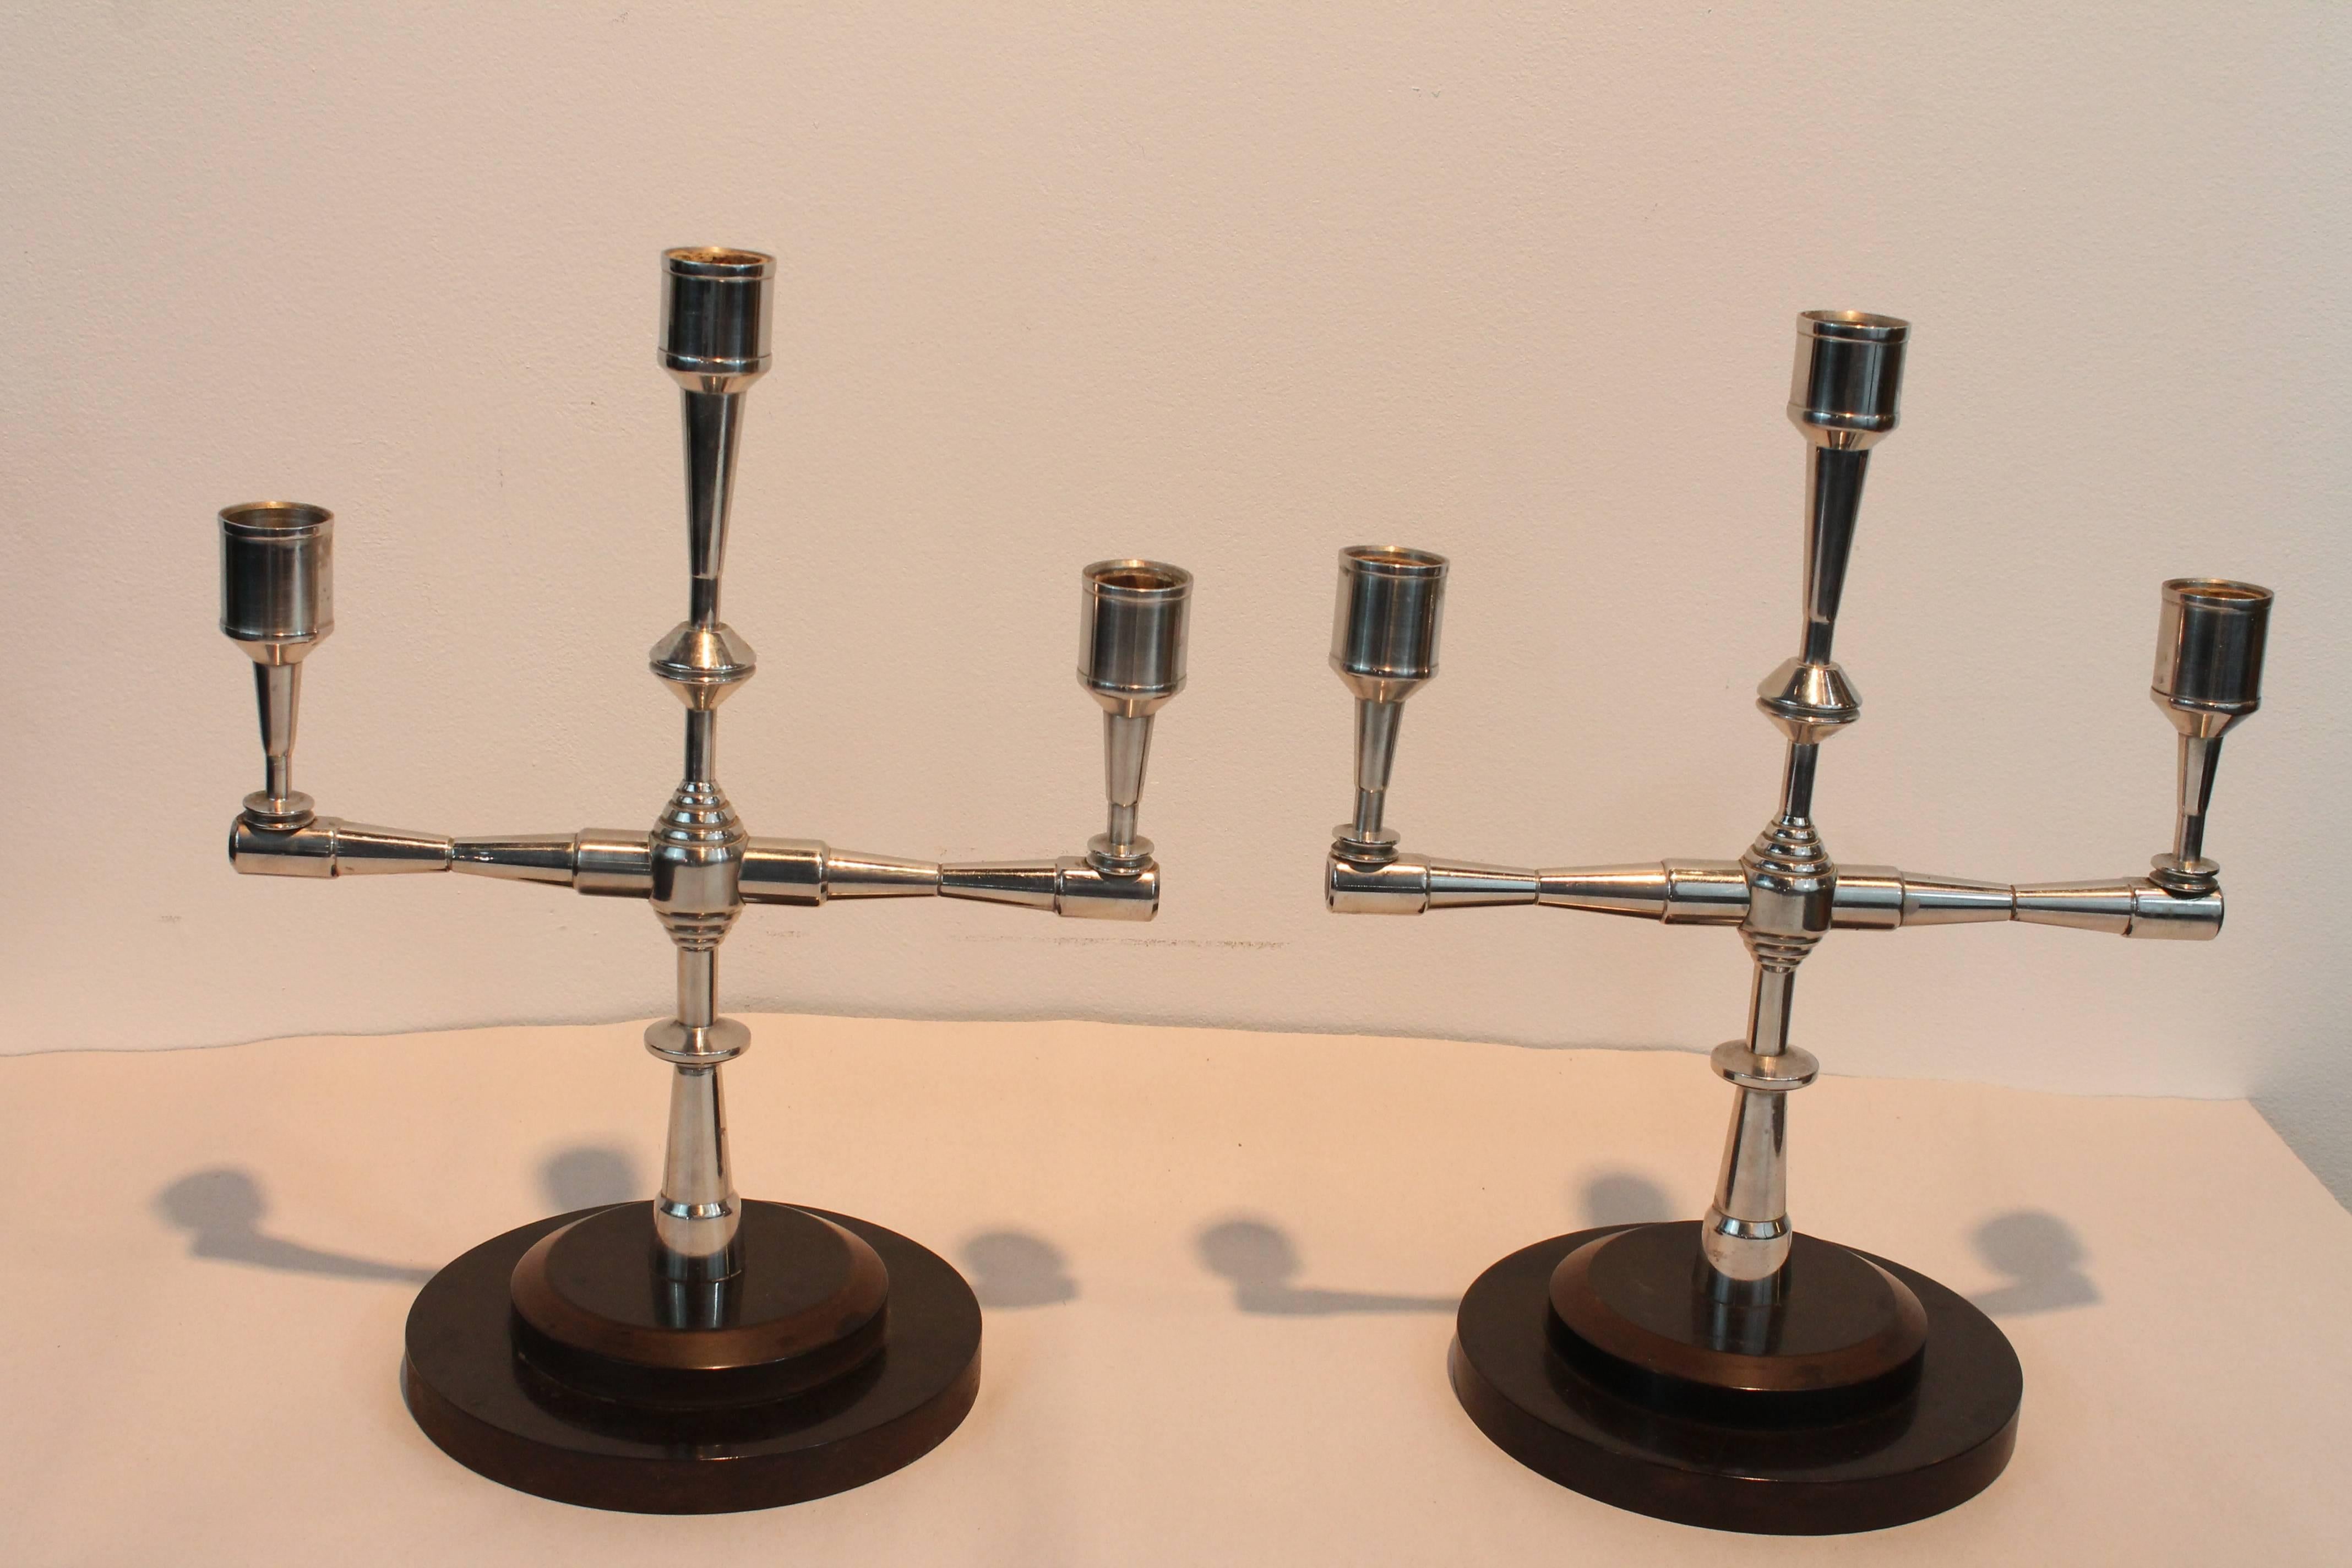 Exceptional Art Deco machinist turned chrome sculptural candle stands on bakelite plinths.
Outstanding graphic presence.